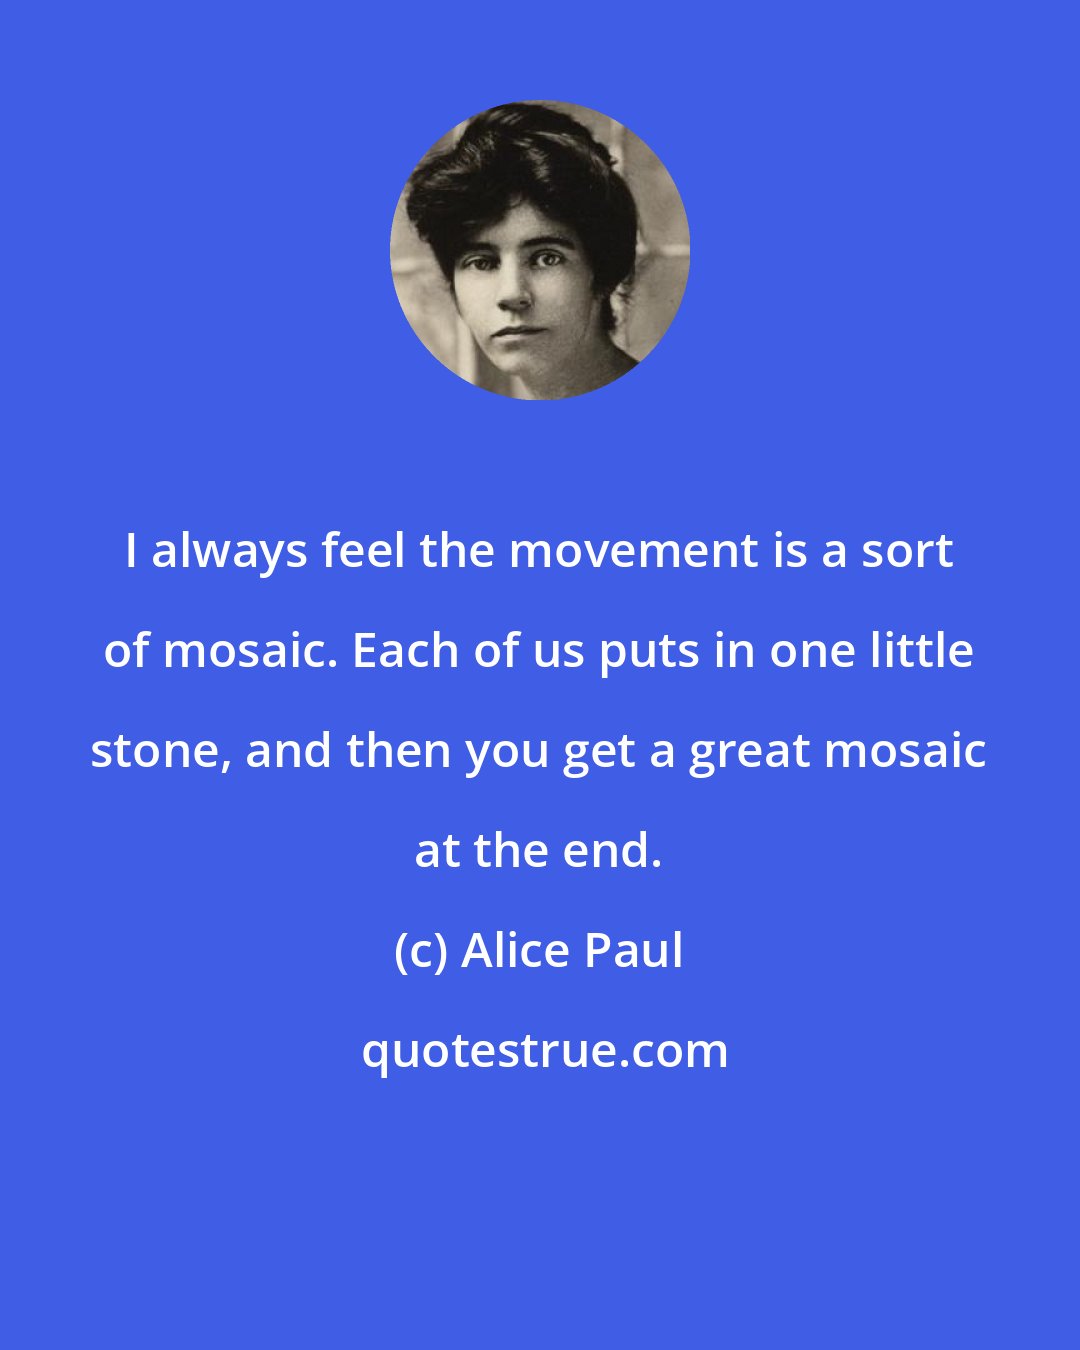 Alice Paul: I always feel the movement is a sort of mosaic. Each of us puts in one little stone, and then you get a great mosaic at the end.